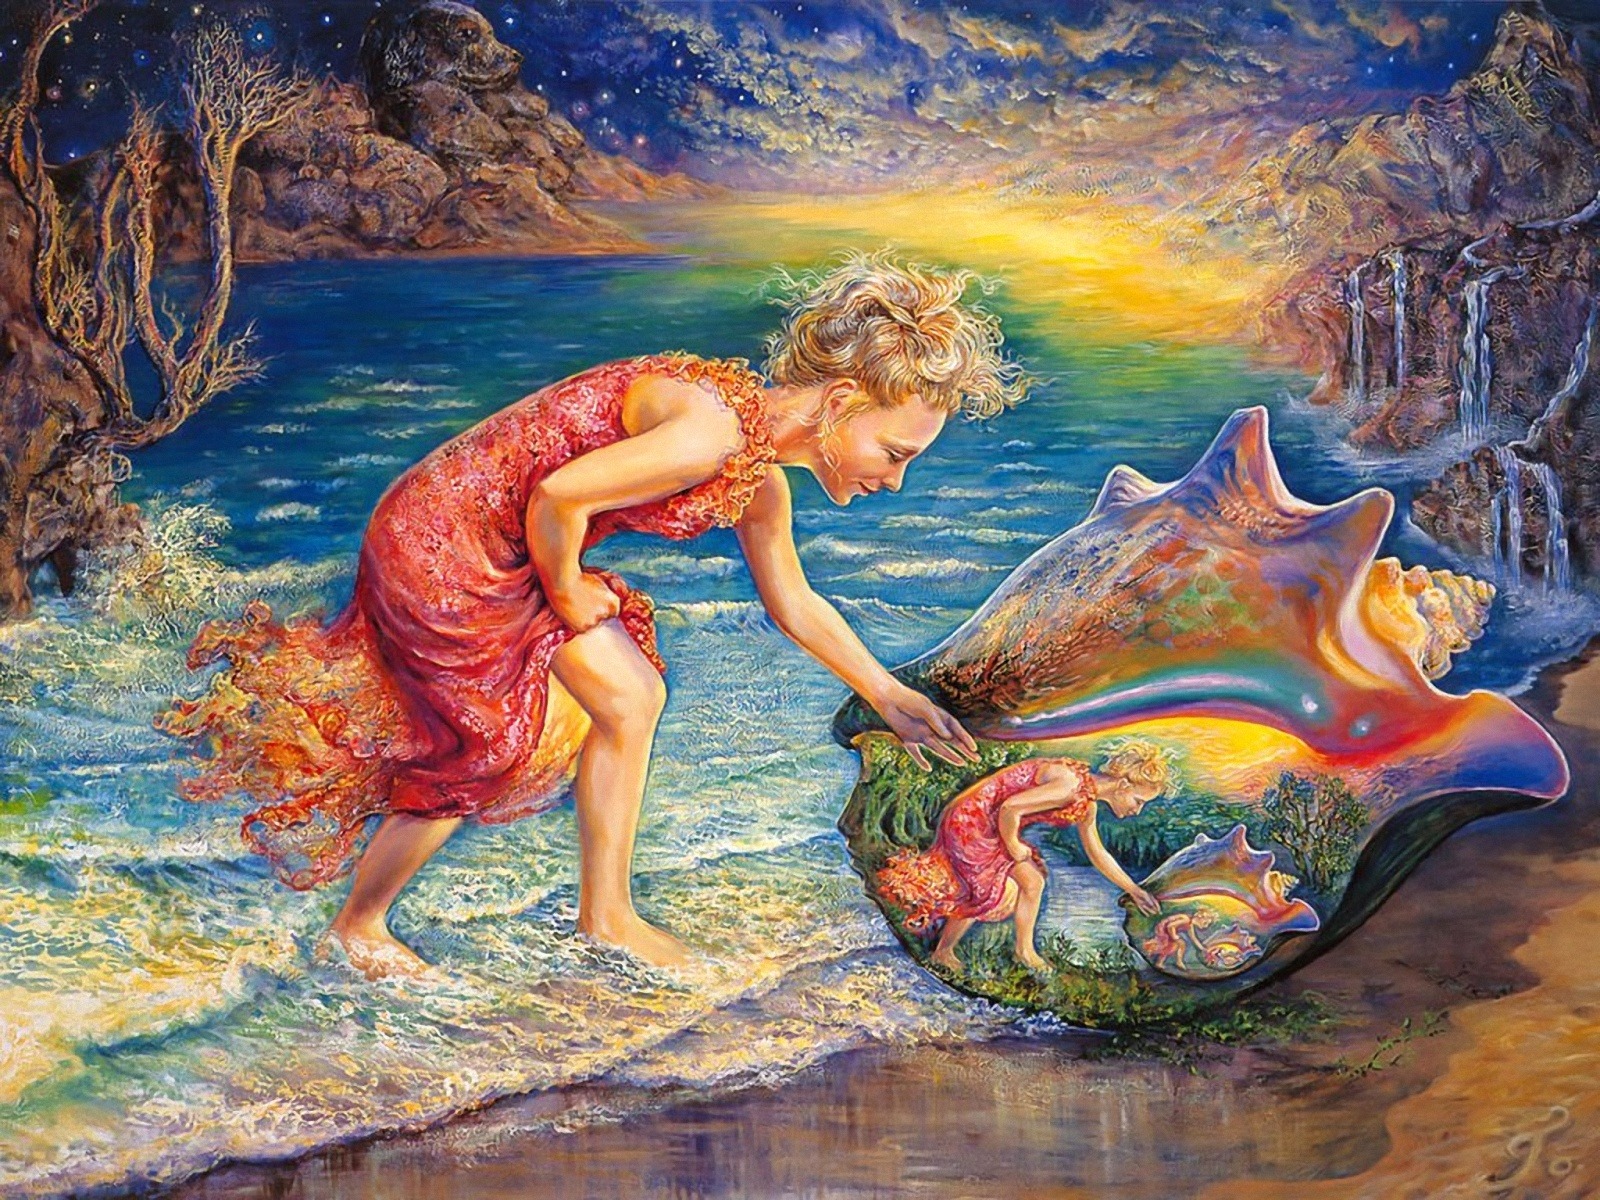 Paintings - Painting By Josephine Wall , HD Wallpaper & Backgrounds